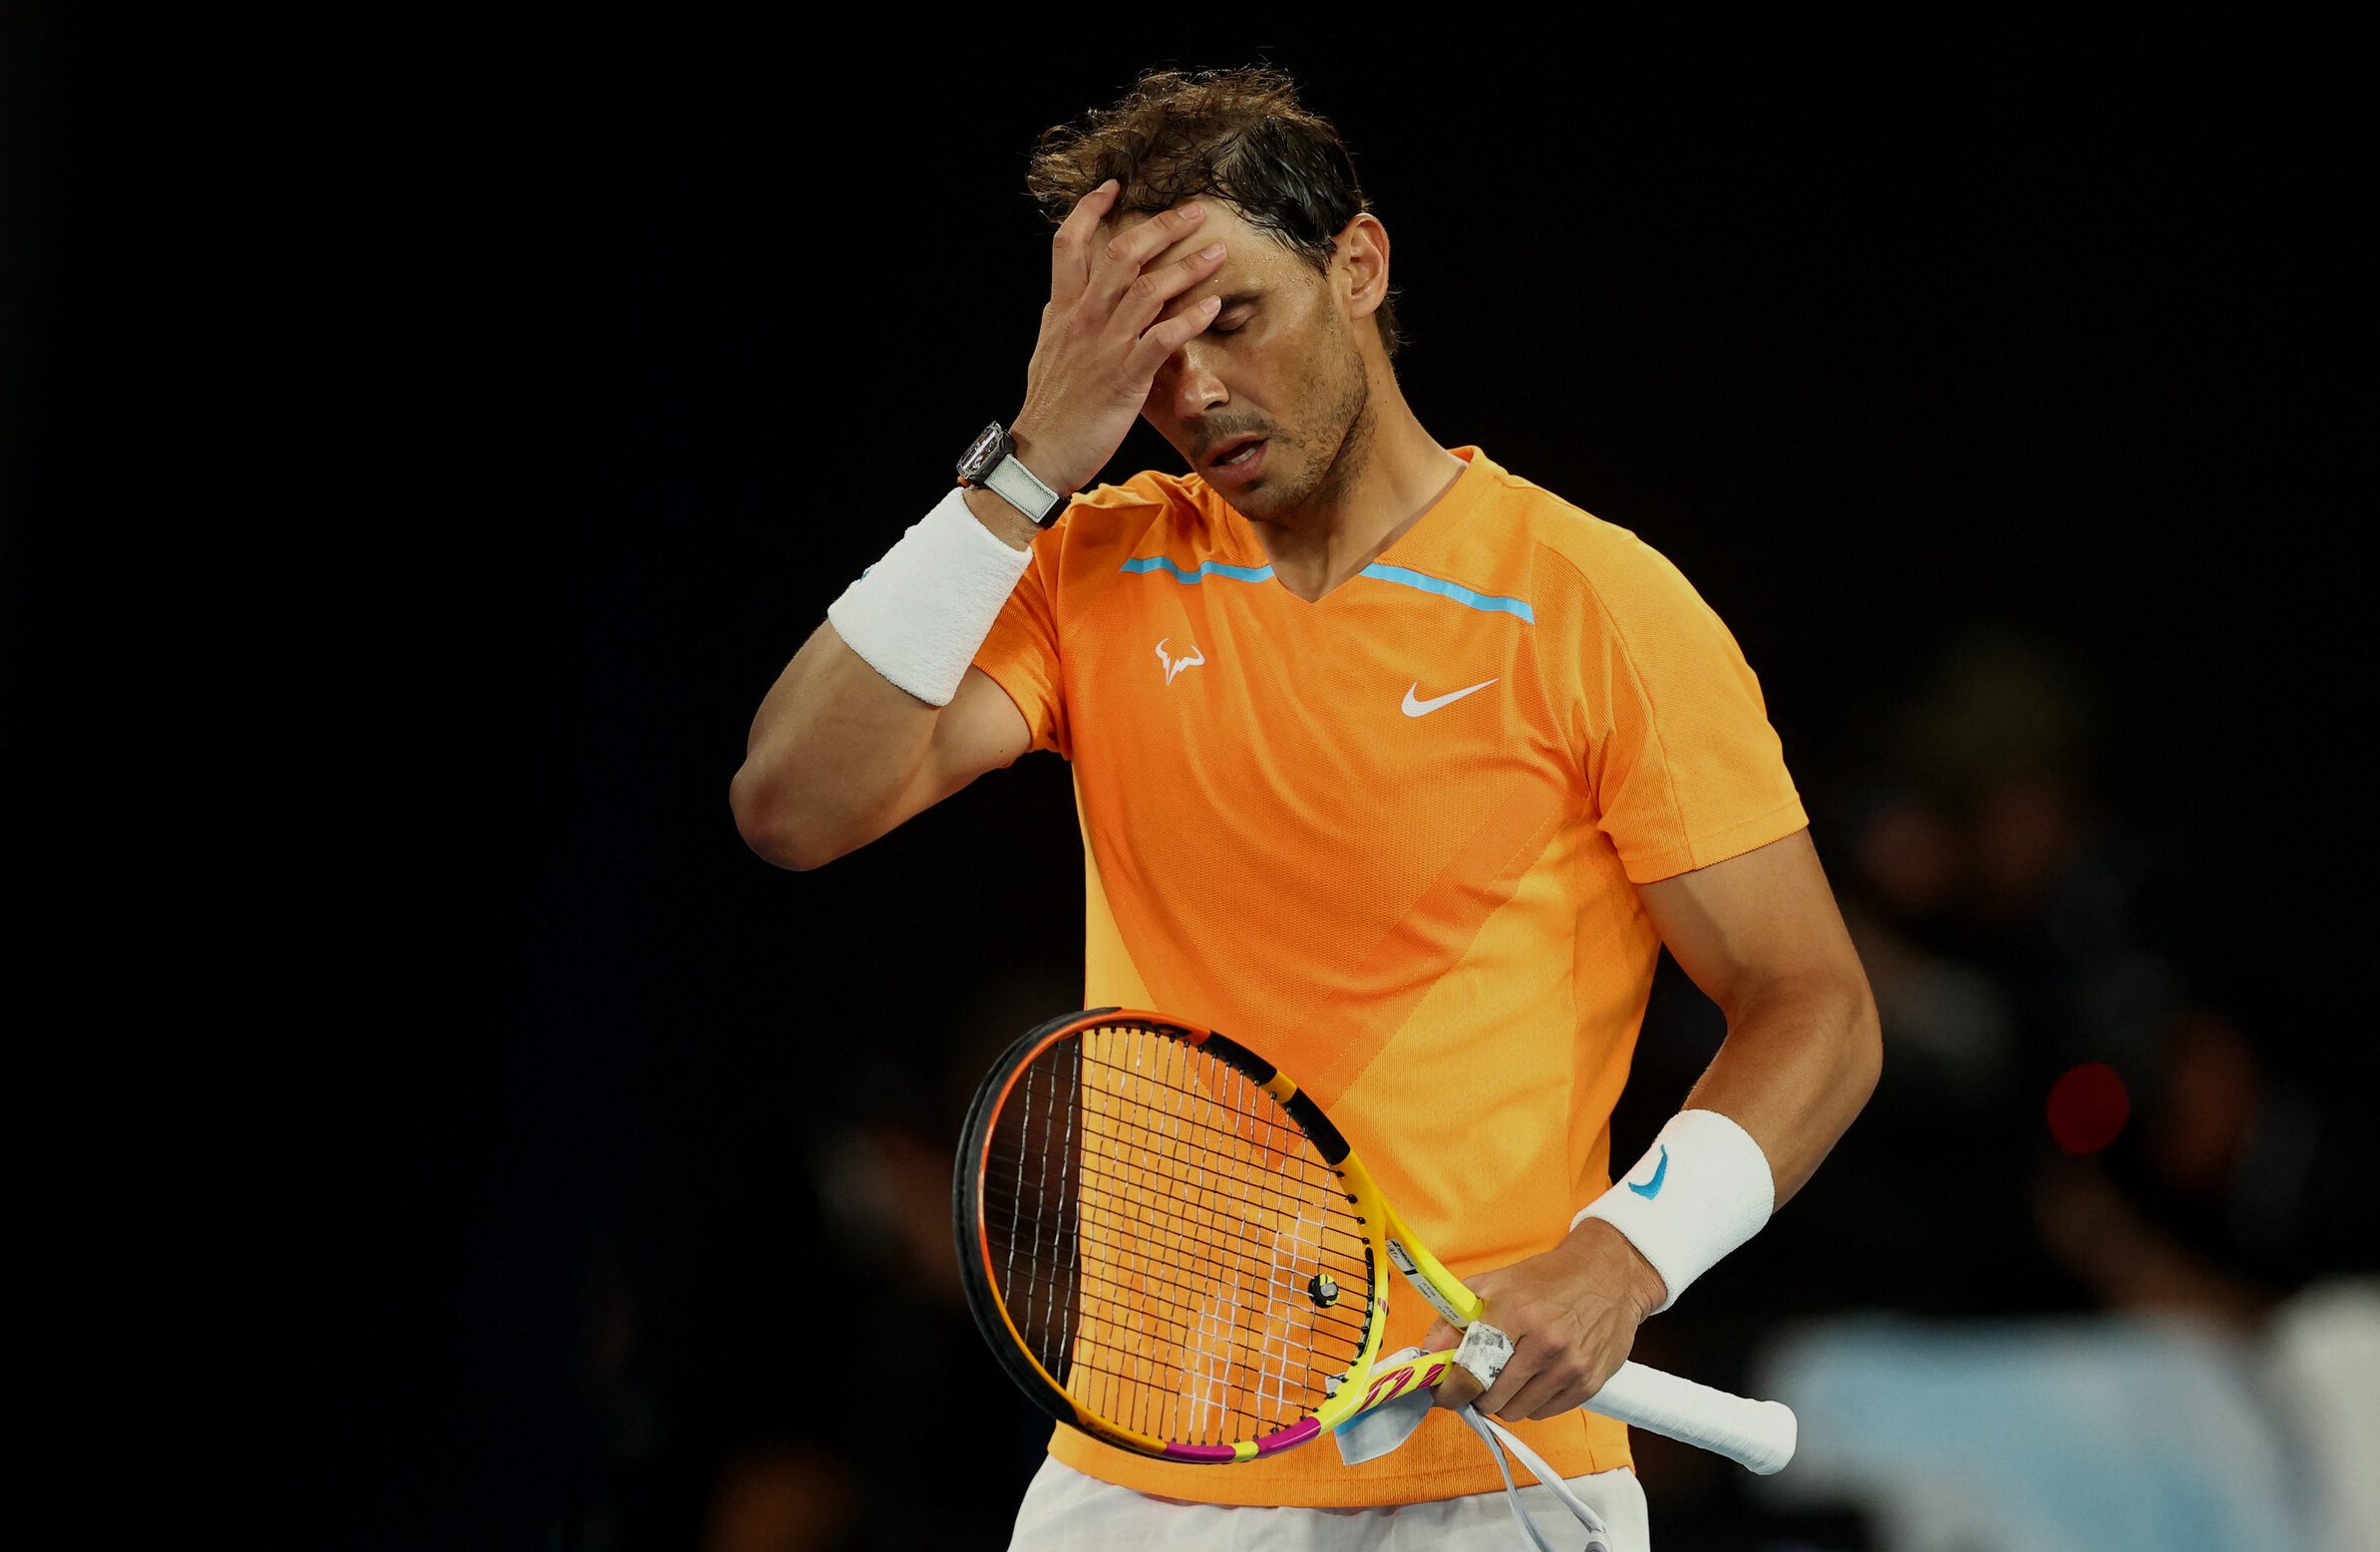 Injured champion Nadal crashes out of Australian Open